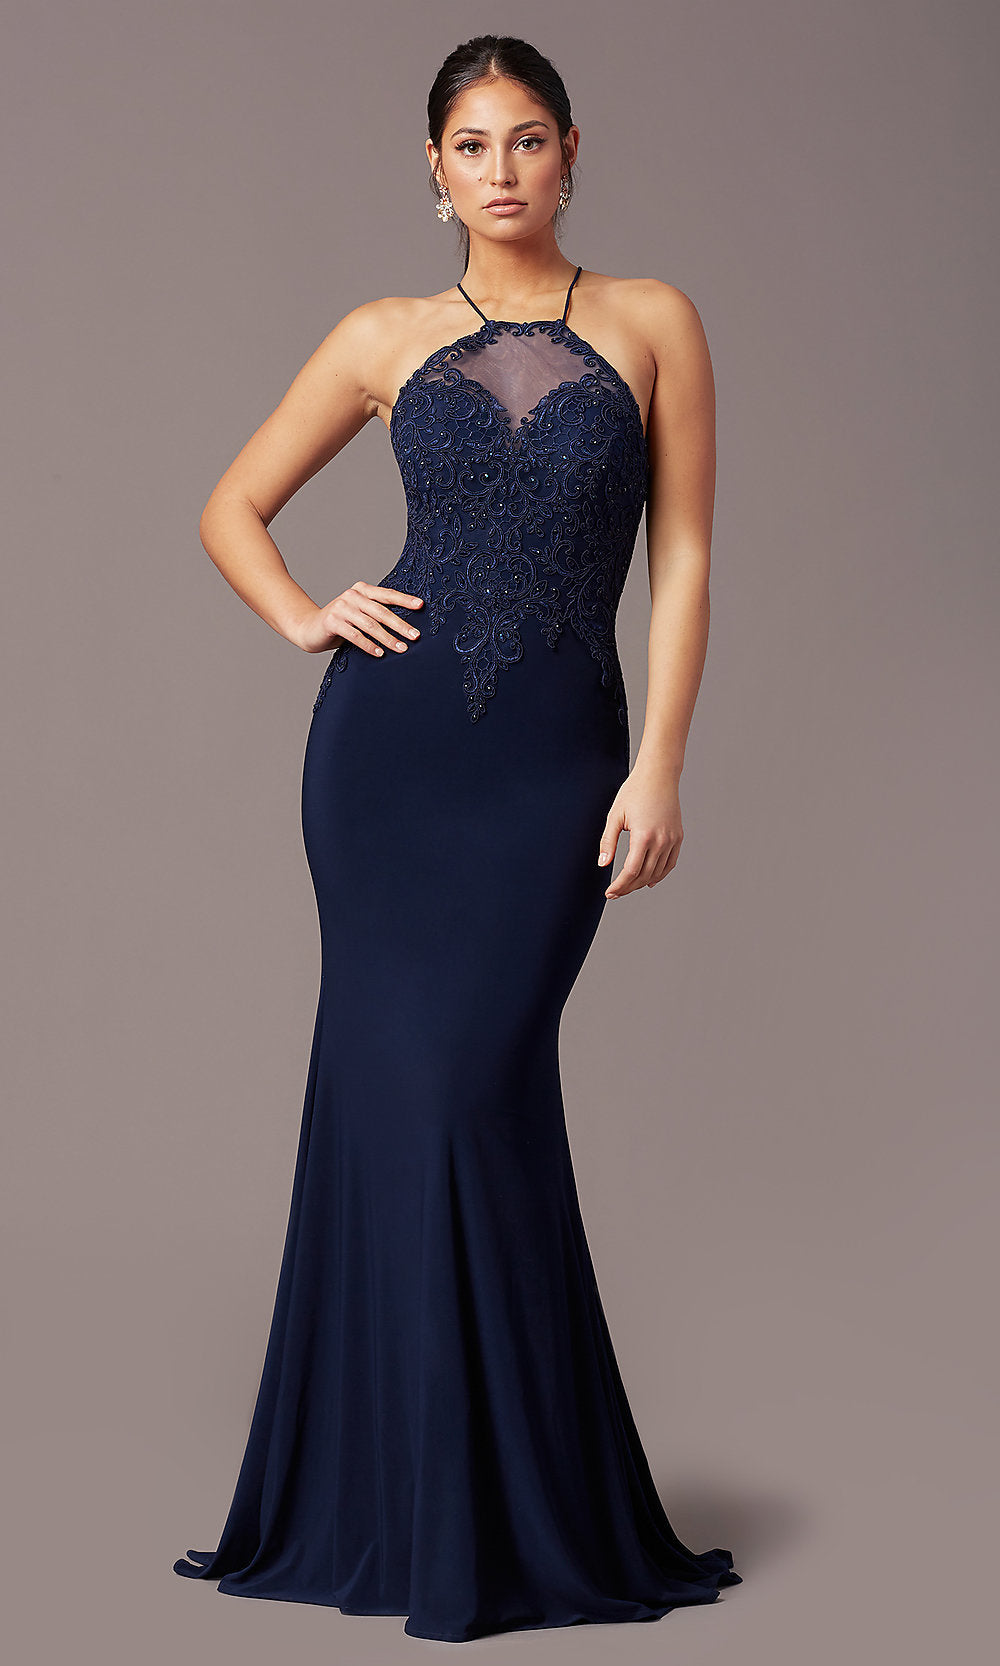 Navy Long Mermaid Navy Blue Prom Dress with Embroidery